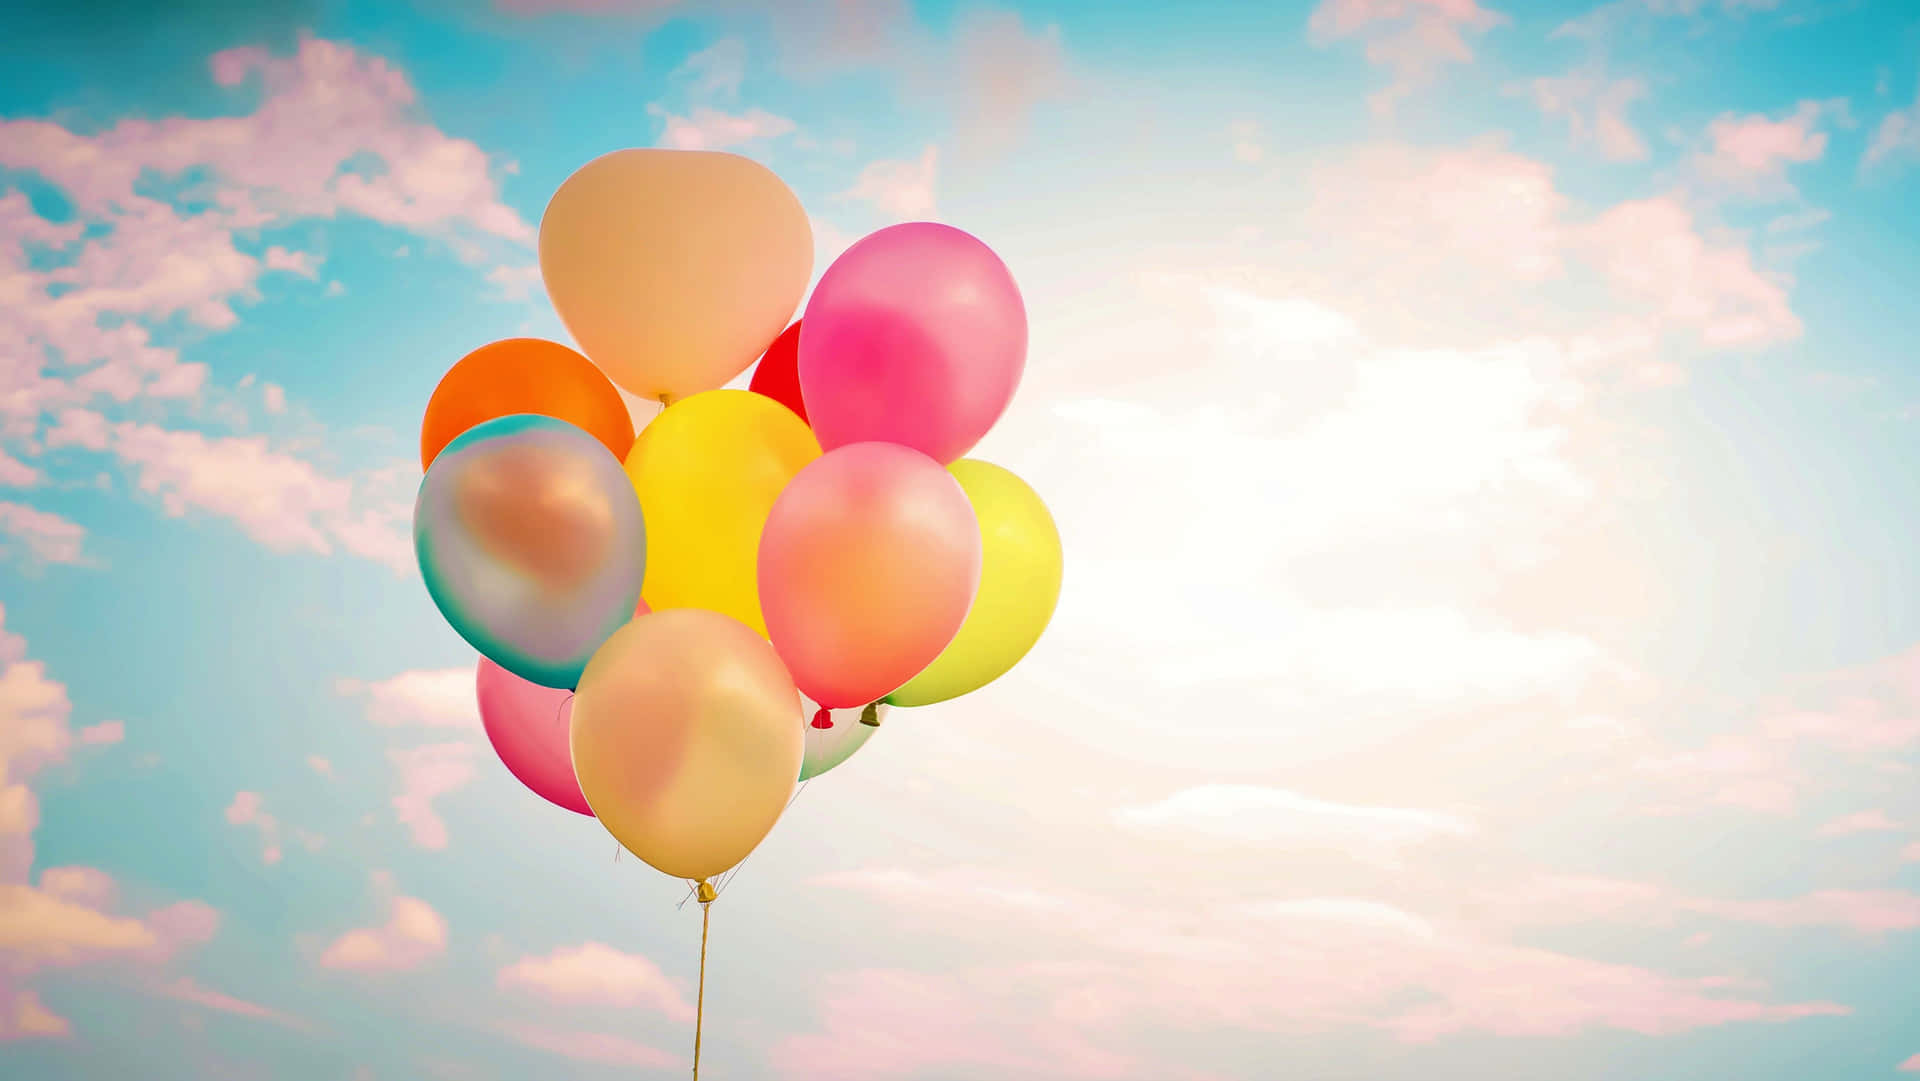 Balloons Floating in the Sky - Perfect for Any Occasion